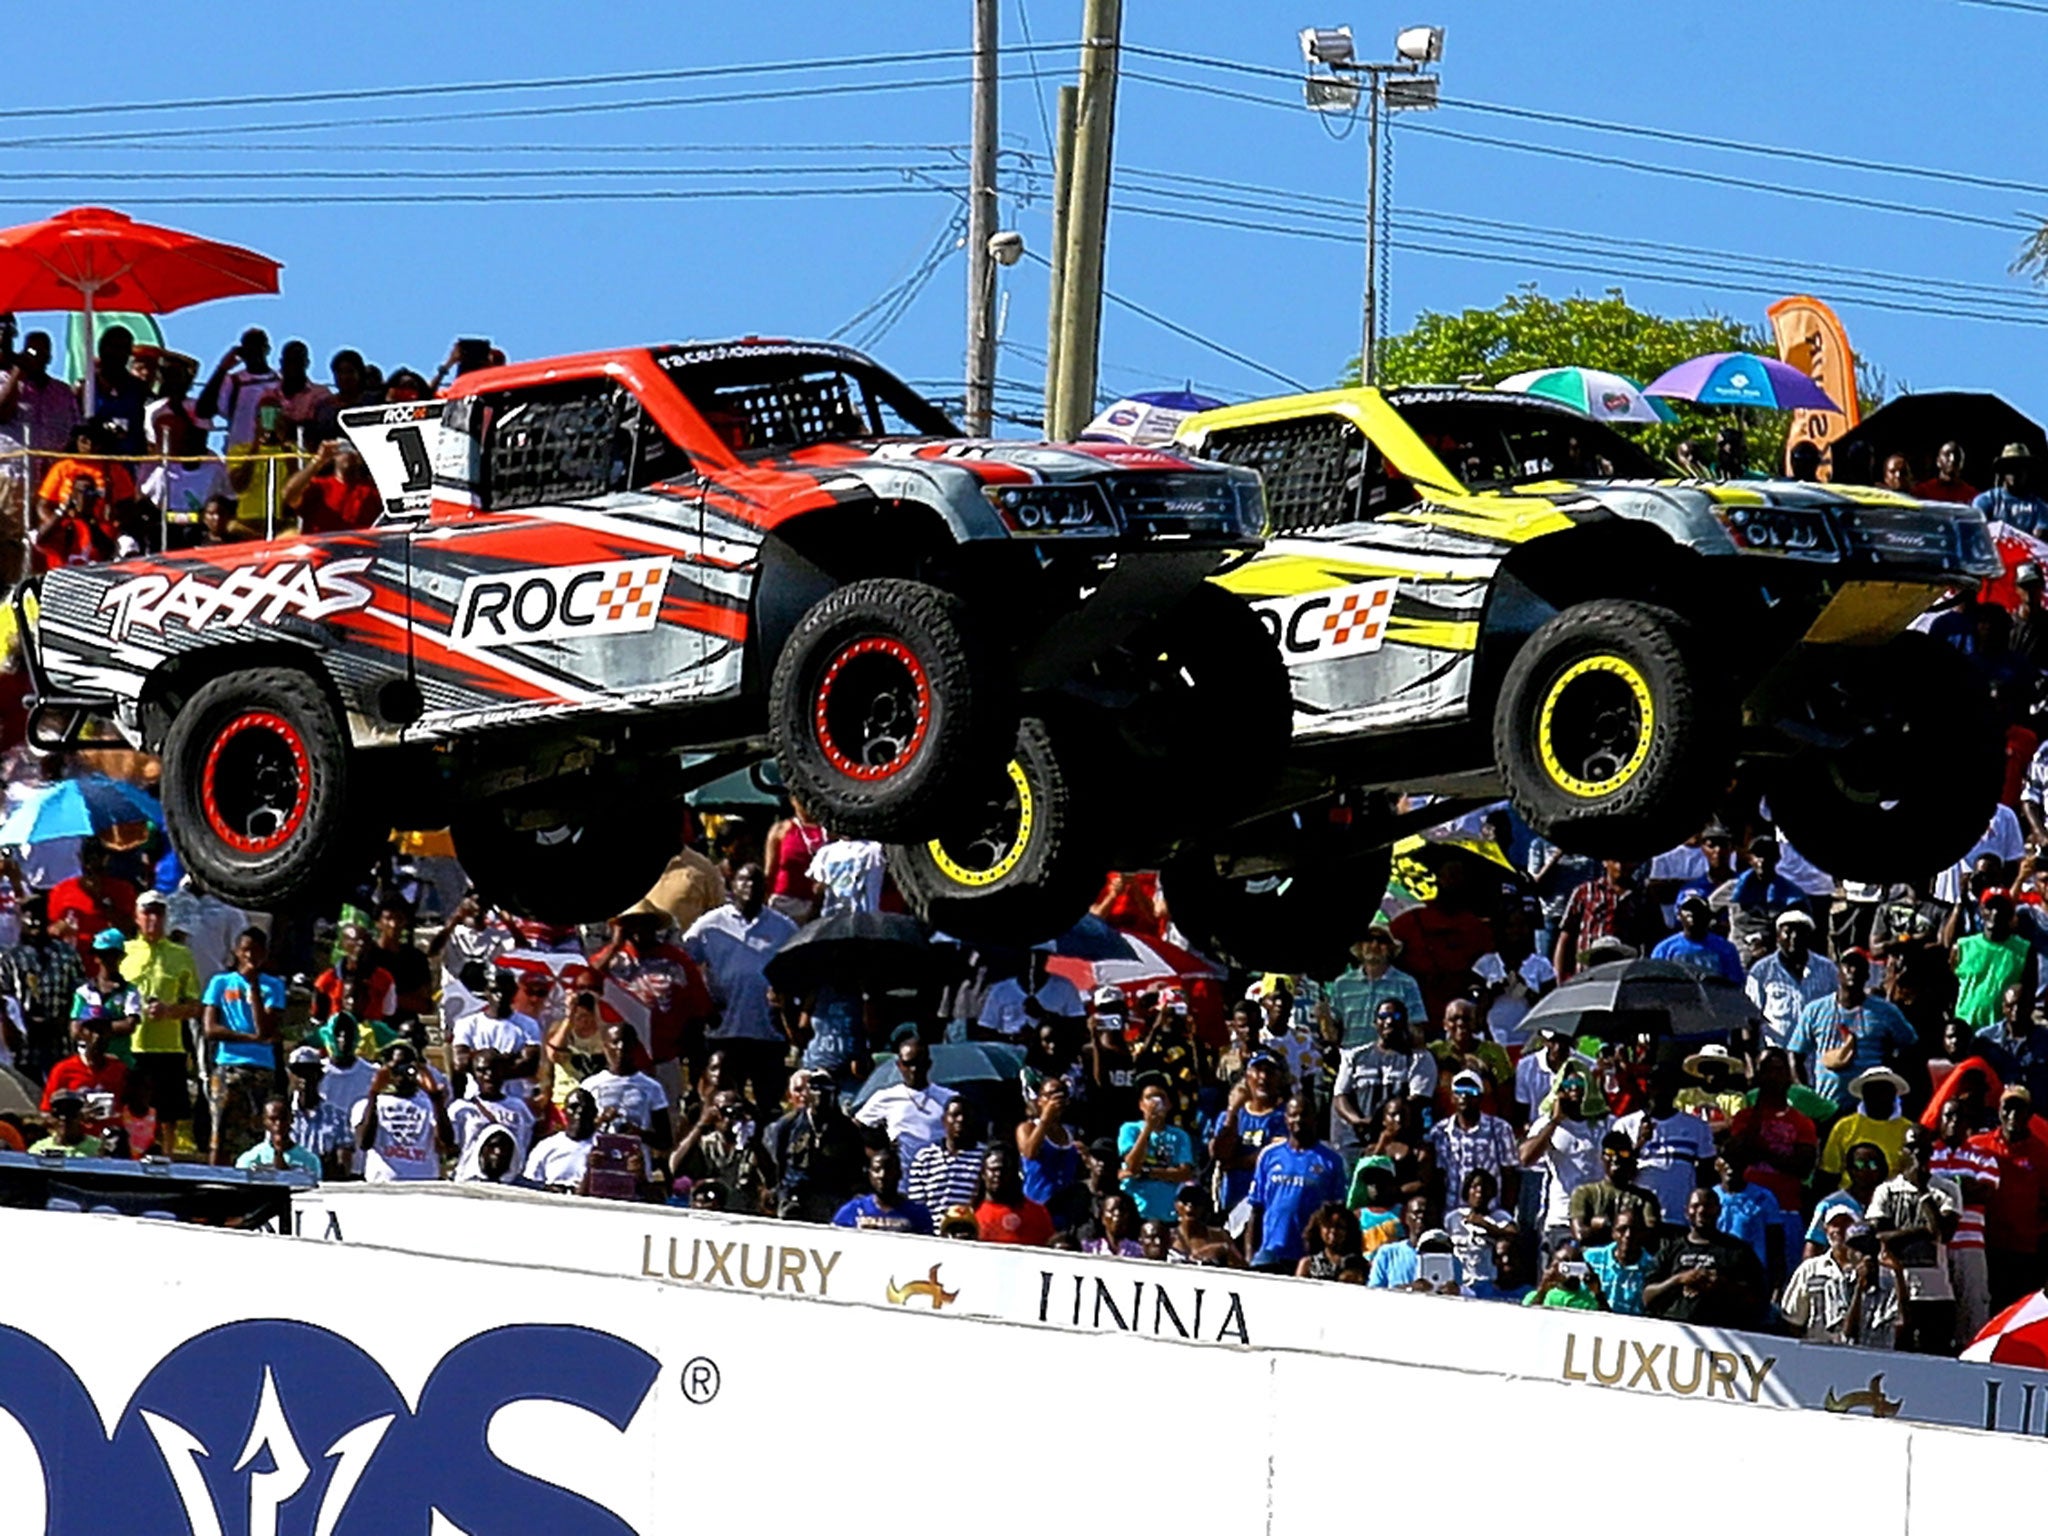 A pair of supertrucks take to the air at the Race of Champions in Barbados